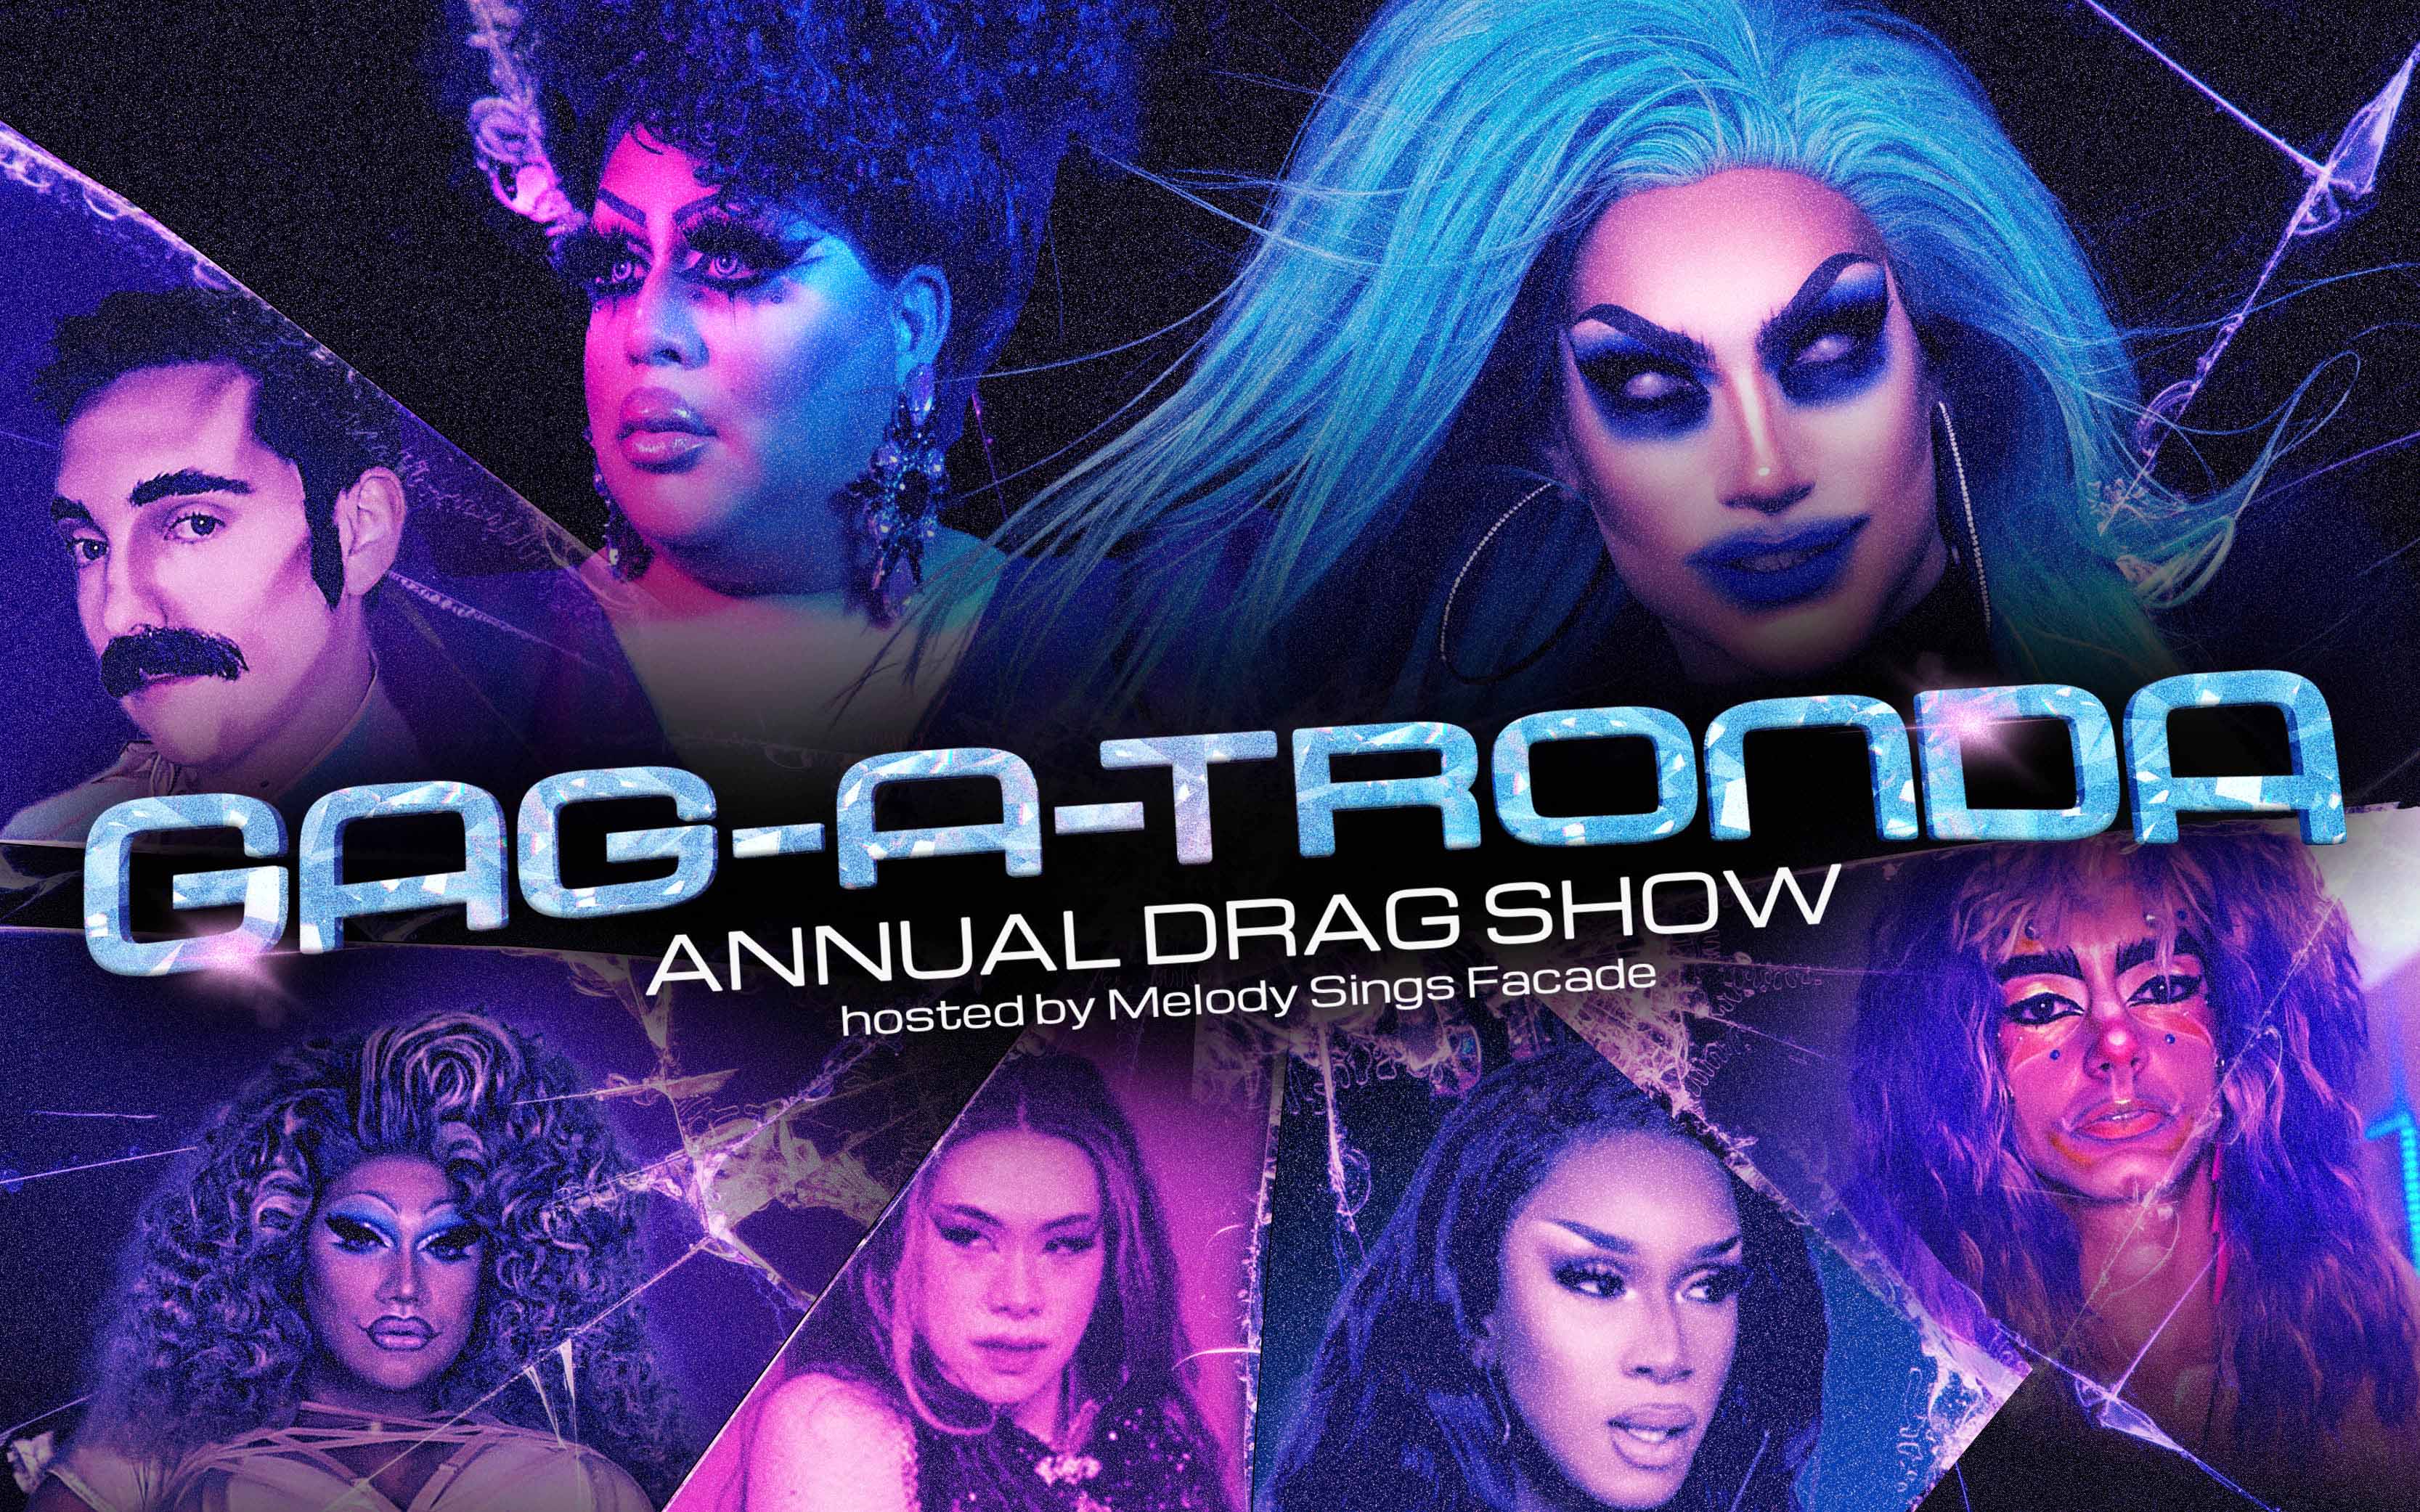 Gag-A-Tronda: Annual Drag Show hosted by Melody Sings Facade